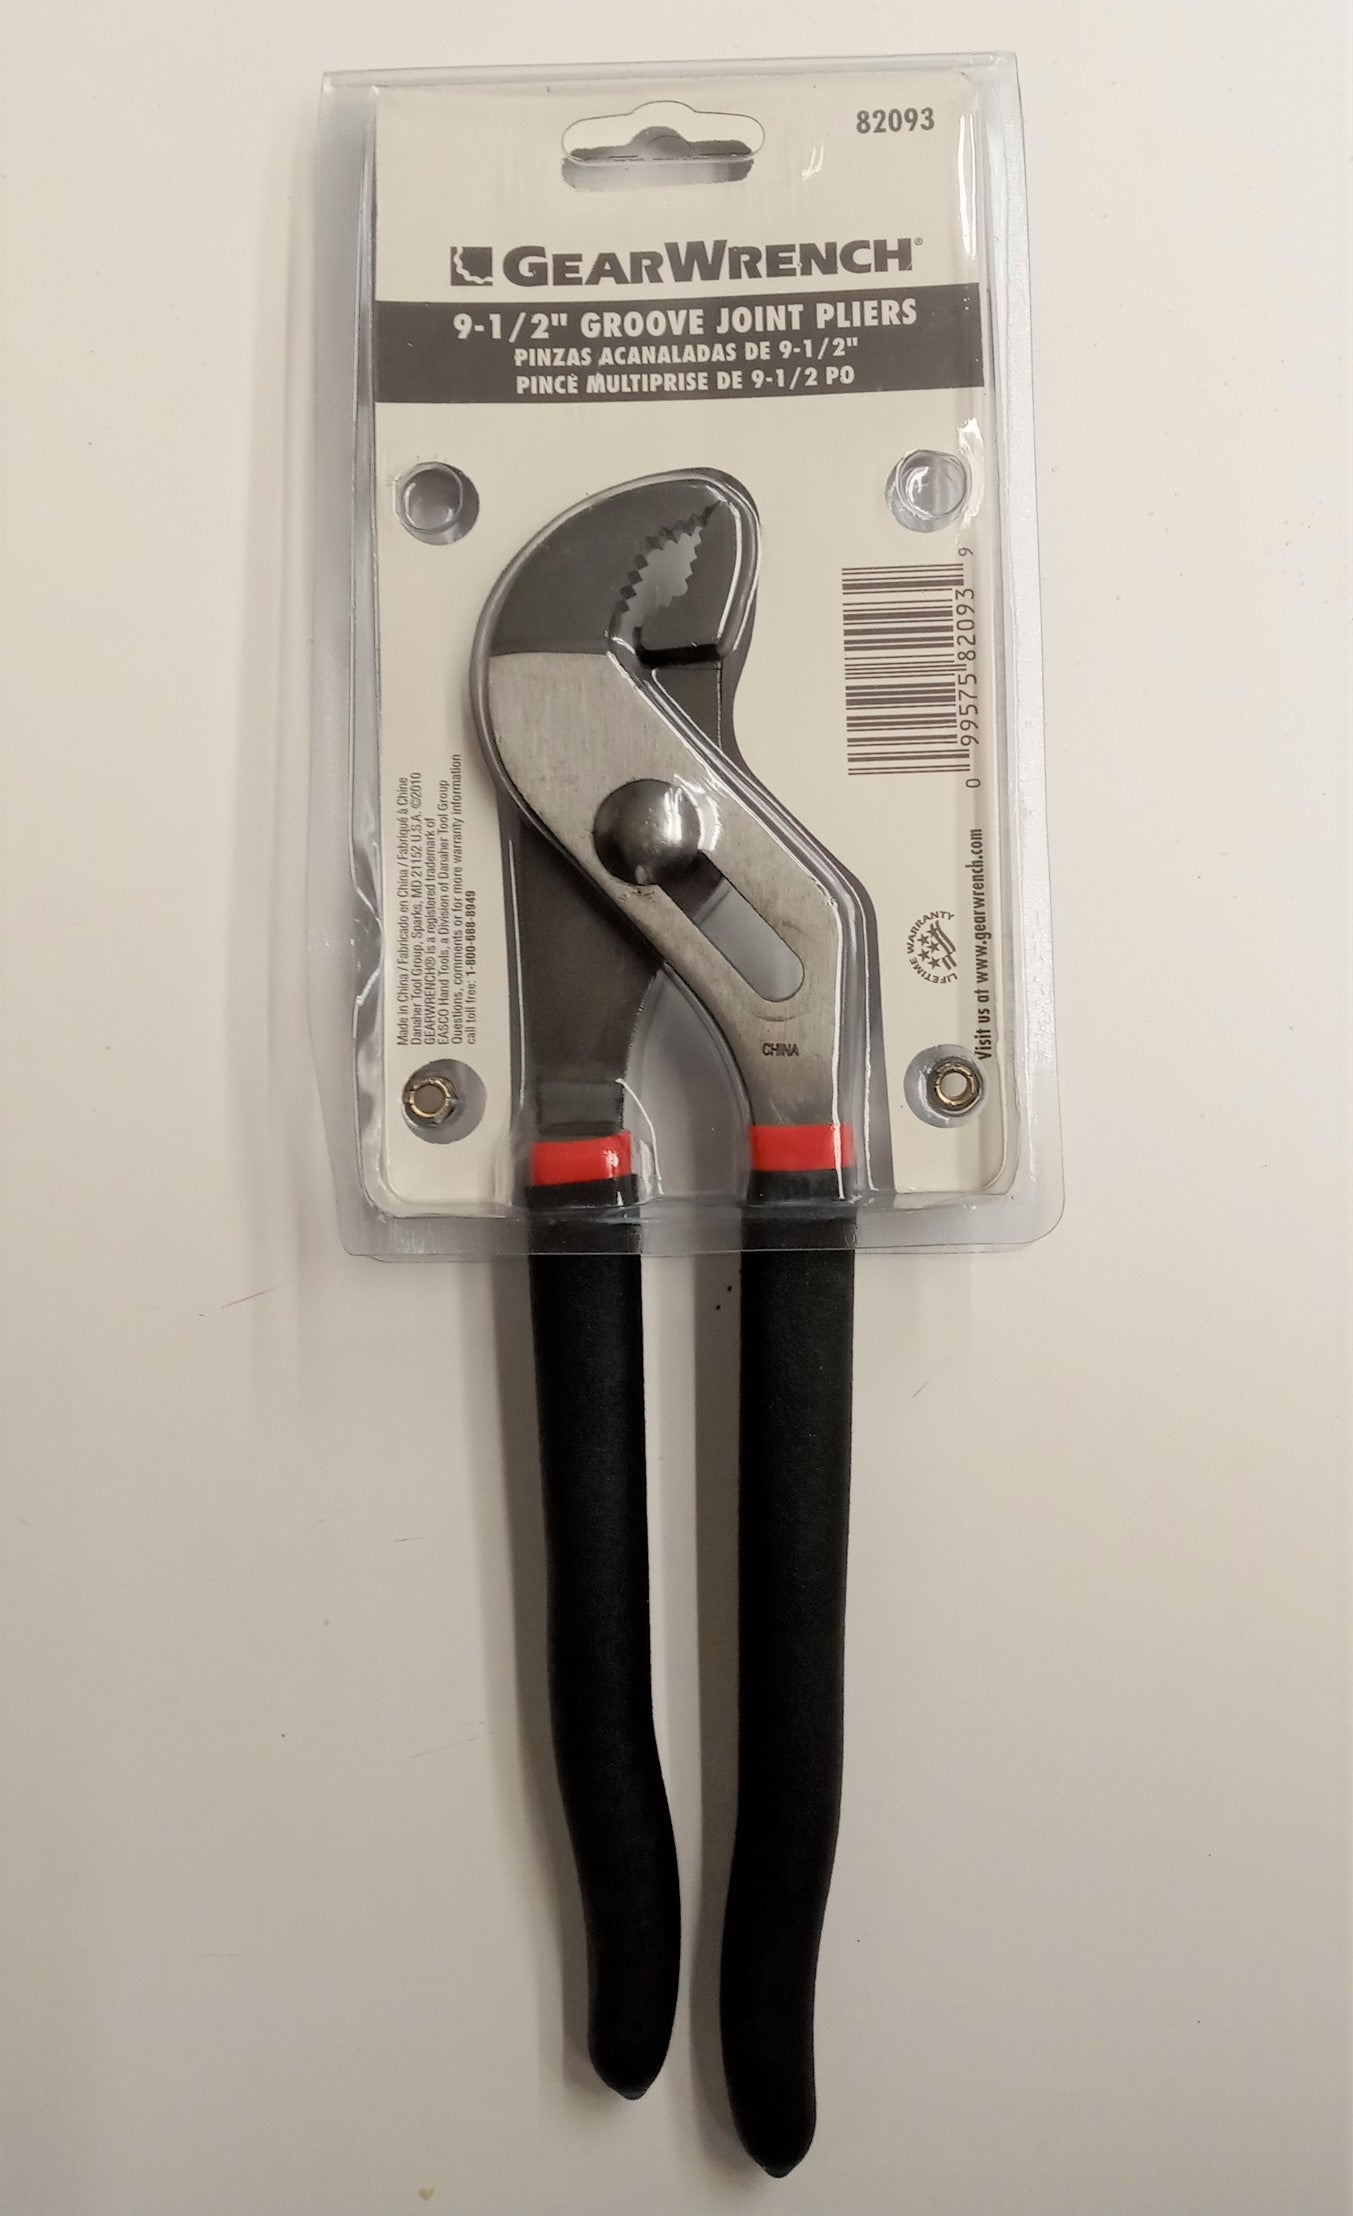 Gearwrench 82093 9-1/2" Groove Joint Pliers